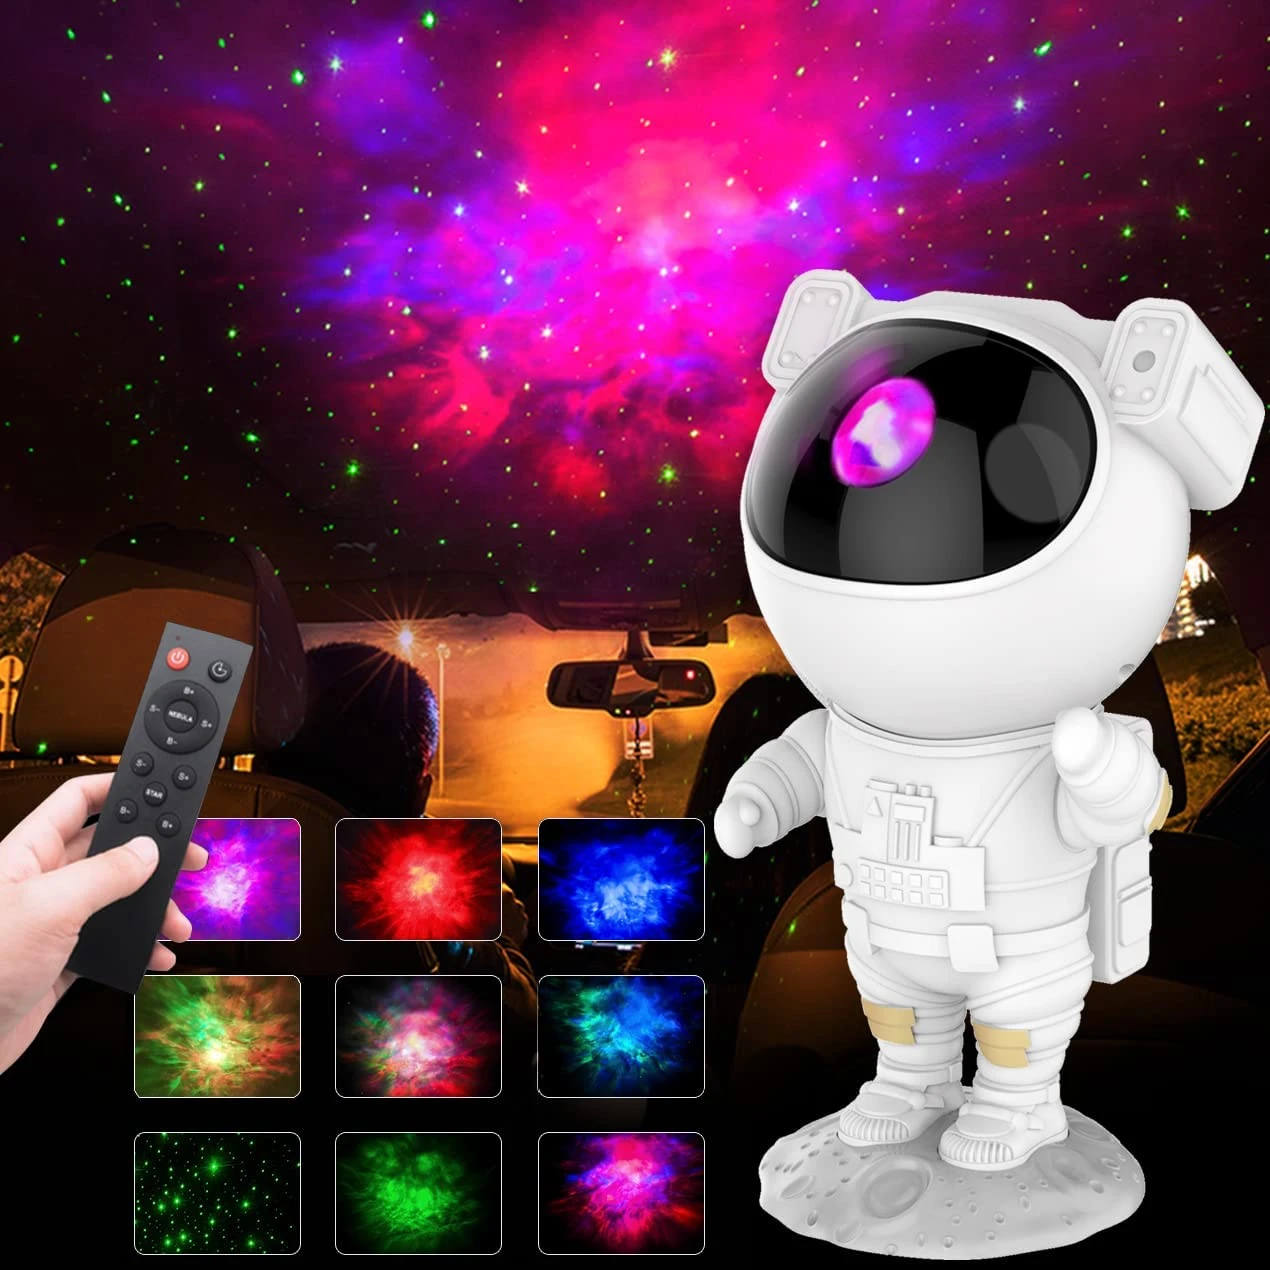 Kids Star Projector Night Light with Remote Control 360°Adjustable Design Astronaut Nebula Galaxy Lighting for Children Adults night lamp